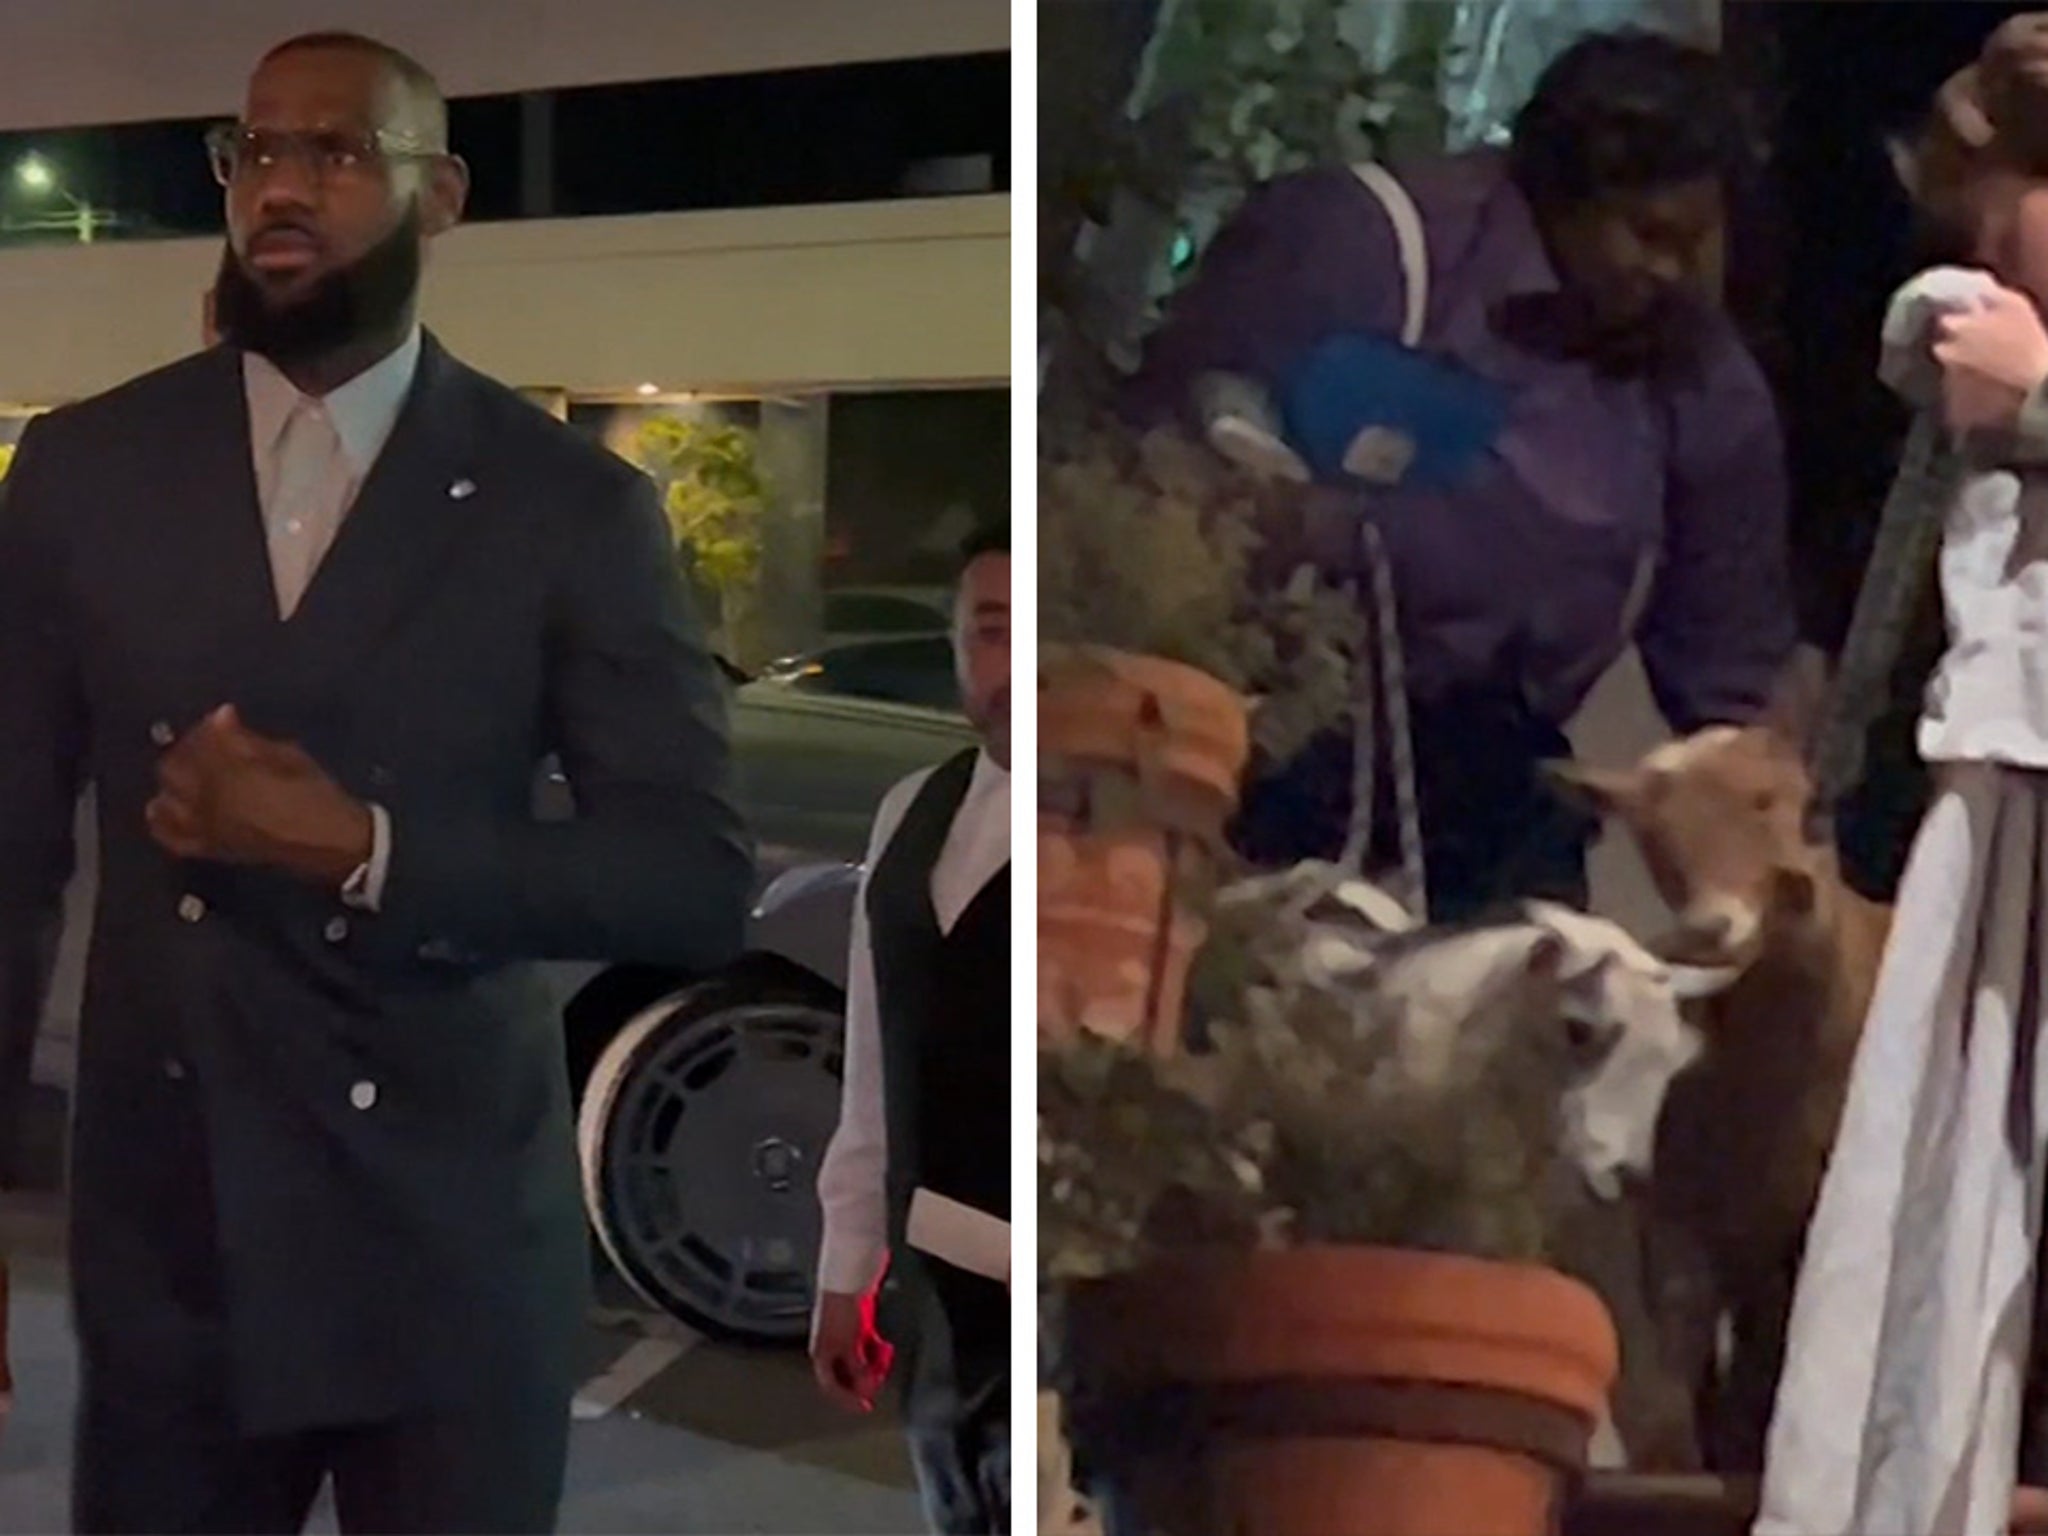 LeBron James Hosts Two Goats At Dinner Party With Savannah, Friends